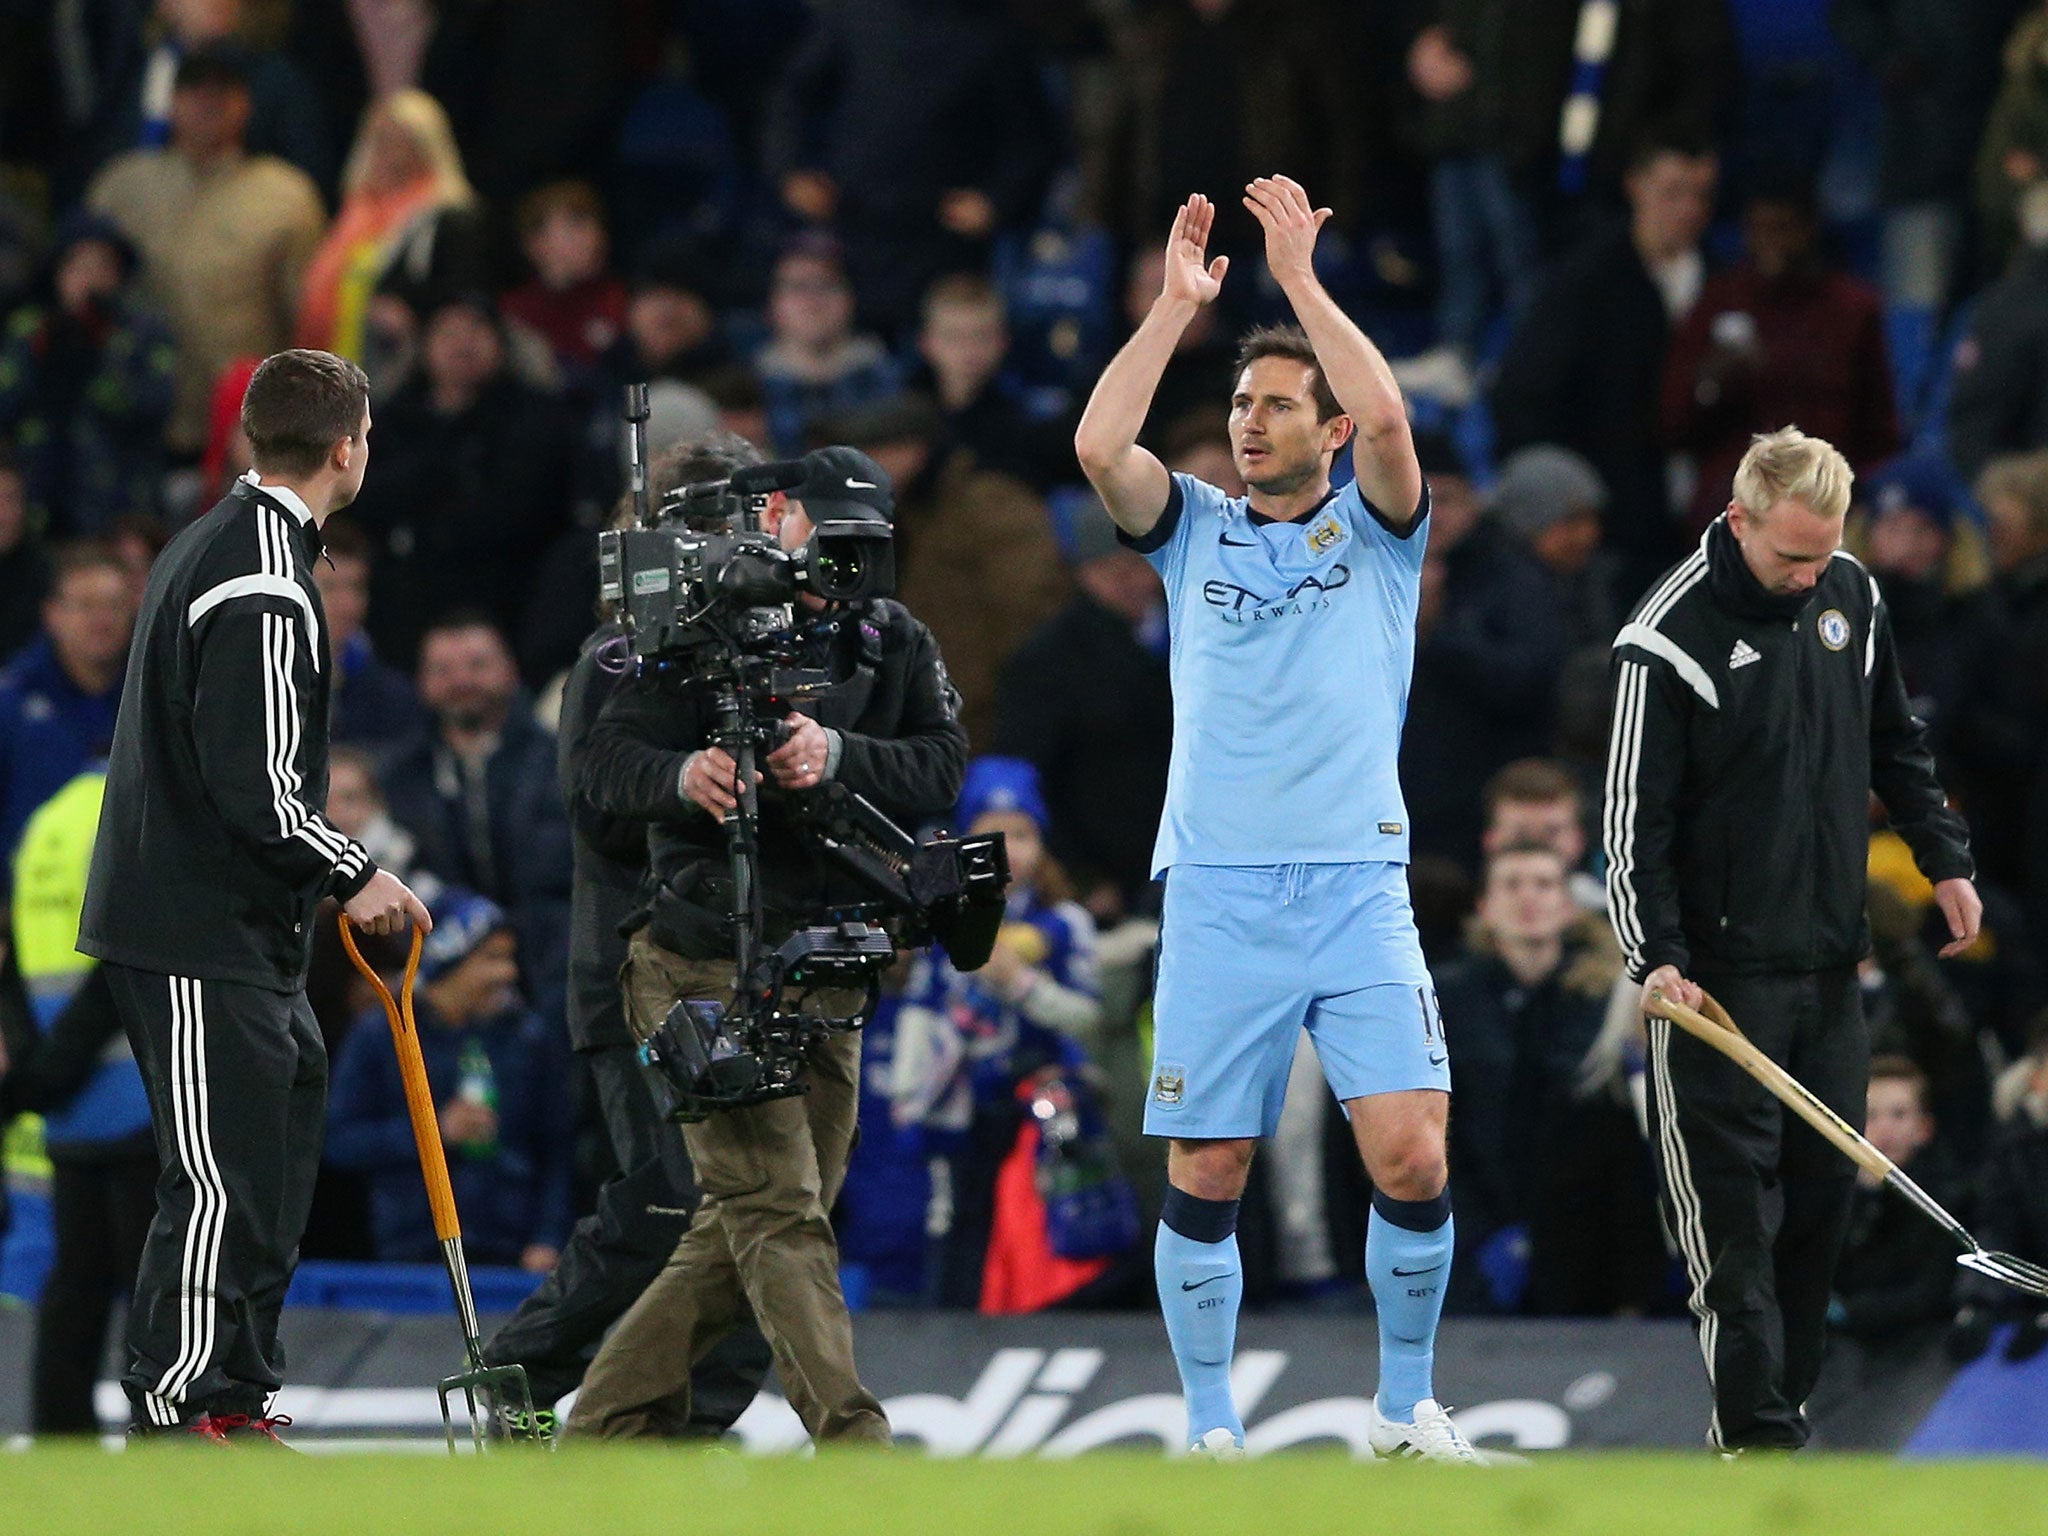 Frank Lampard applauds the Chelsea fans as well as the Manchester City supporters